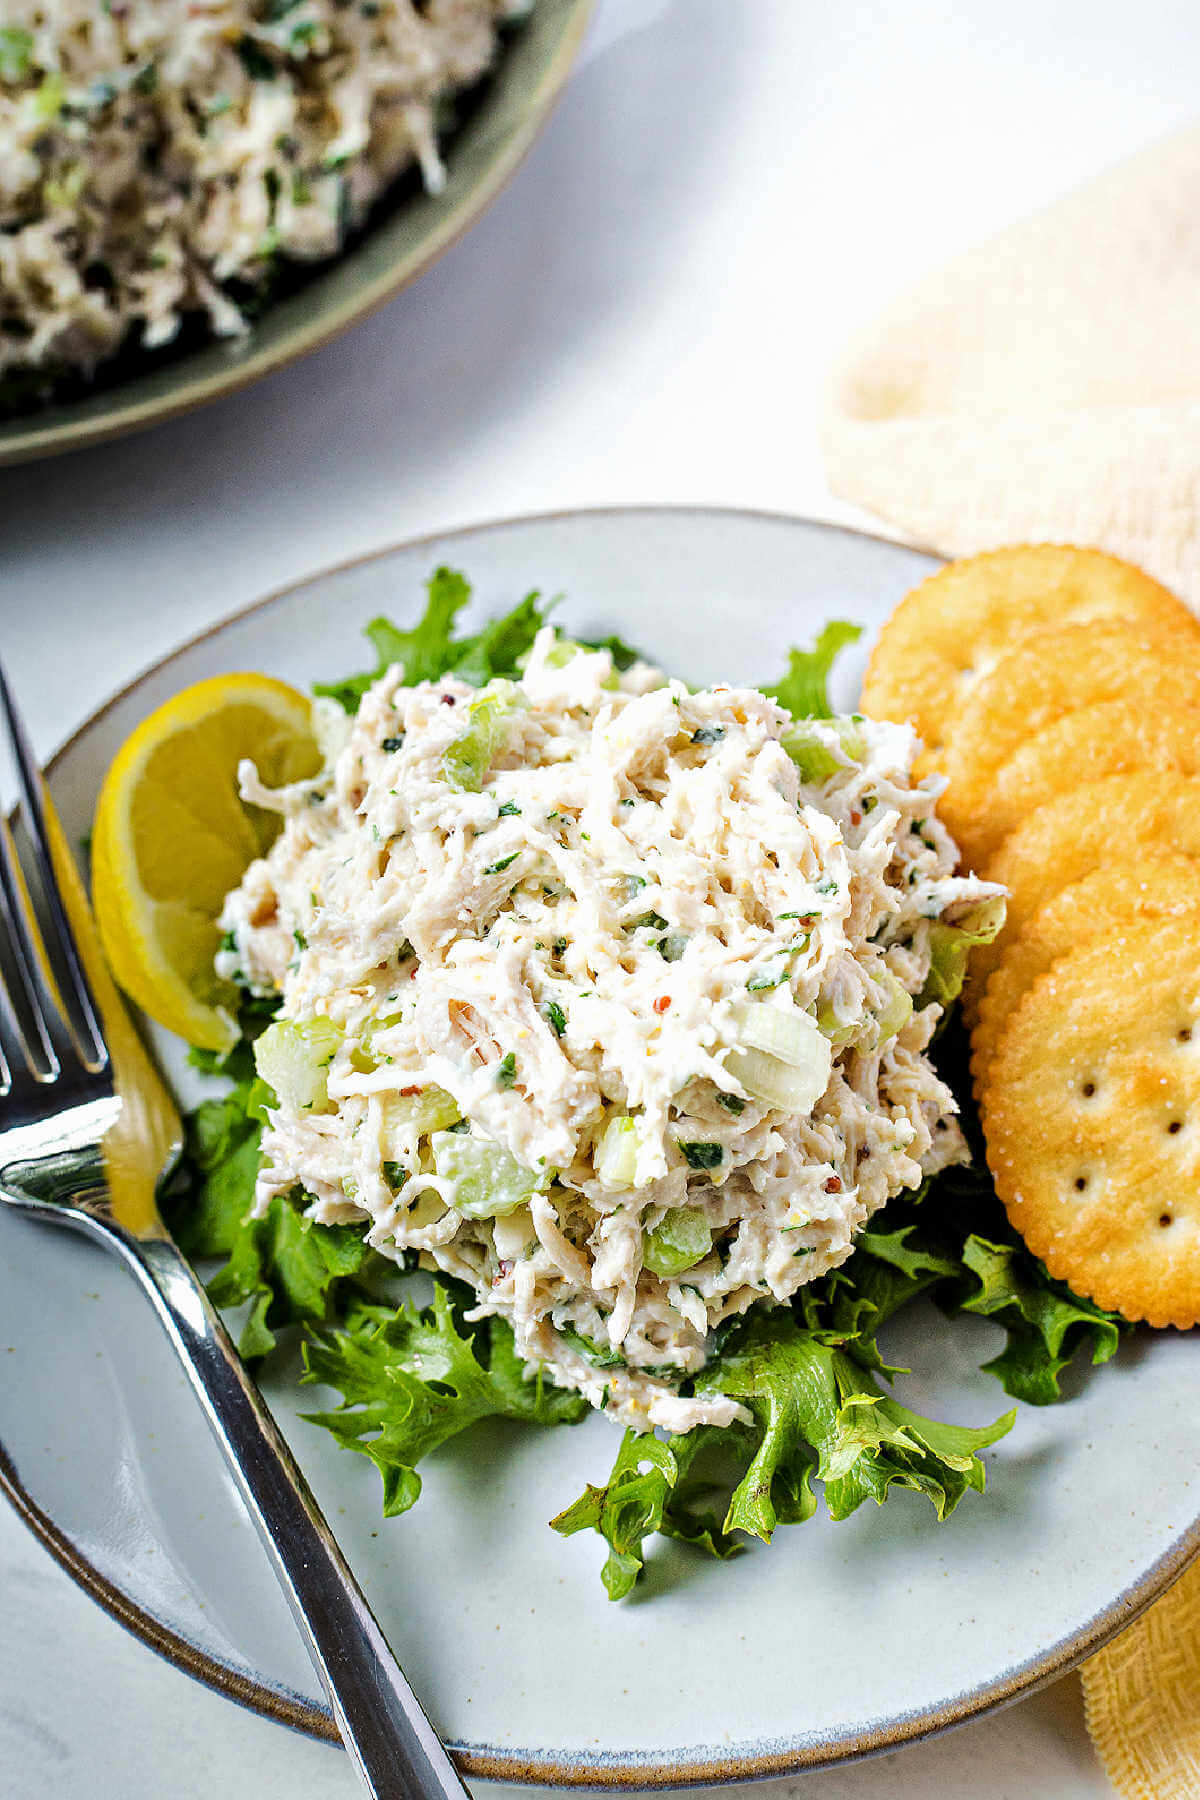 a scoop of chicken salad on a bed of lettuce with Ritz crackers and a lemon wedge on the side.